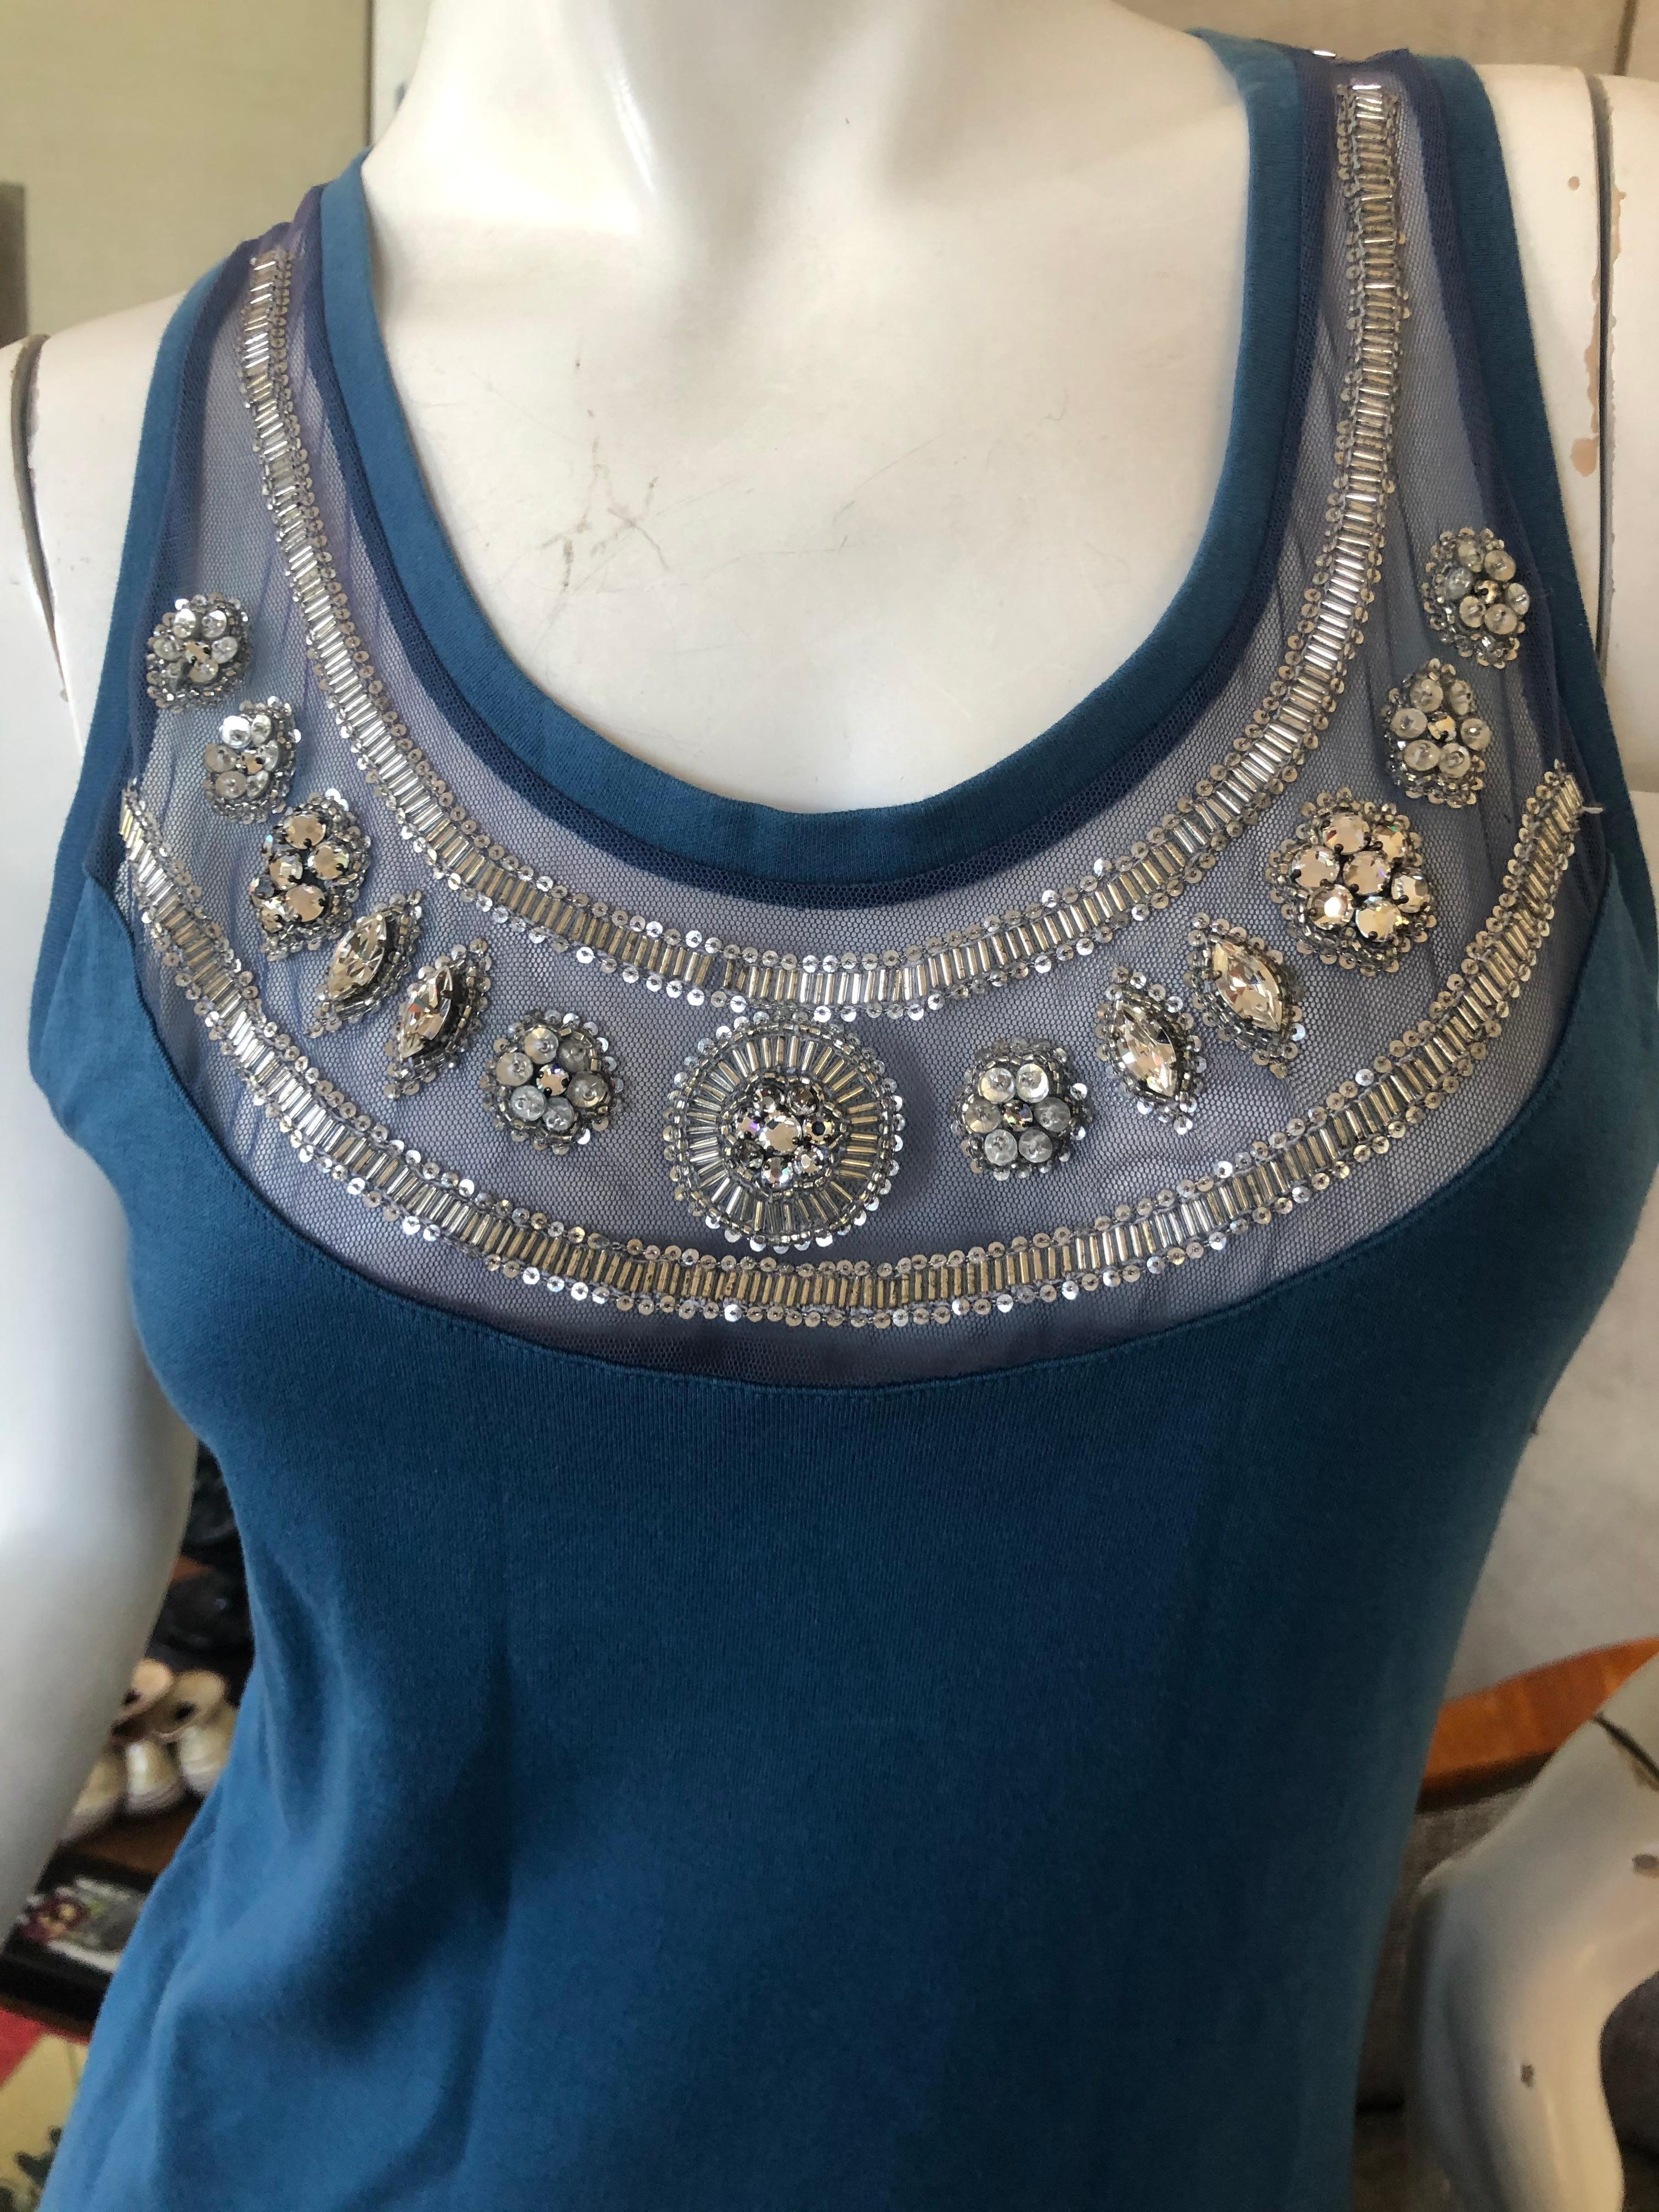 Christian Dior Crystal Embellished Evening Top by John Galliano For Sale 1